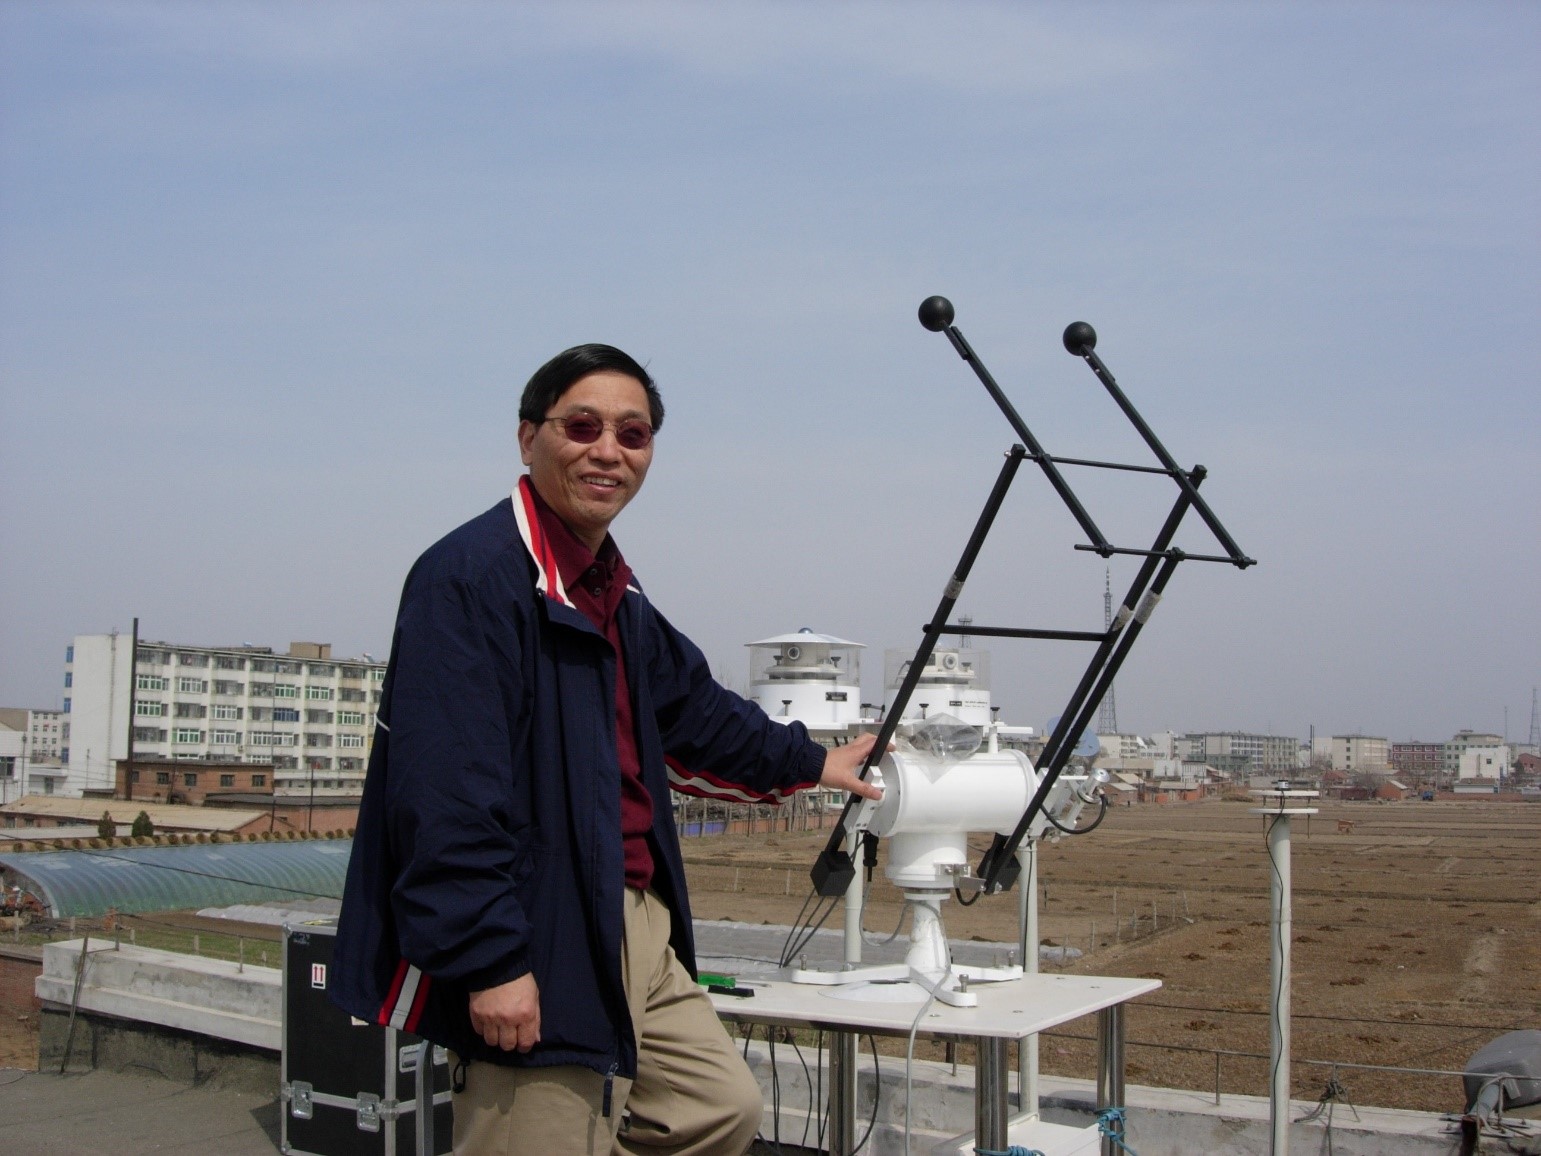 Zhanqing Li poses at a field site in China during AEROSOLINDIRECT, an ARM field campaign he led in 2008. Researchers investigated the effects of aerosols on what was then that country’s fast-changing atmosphere.